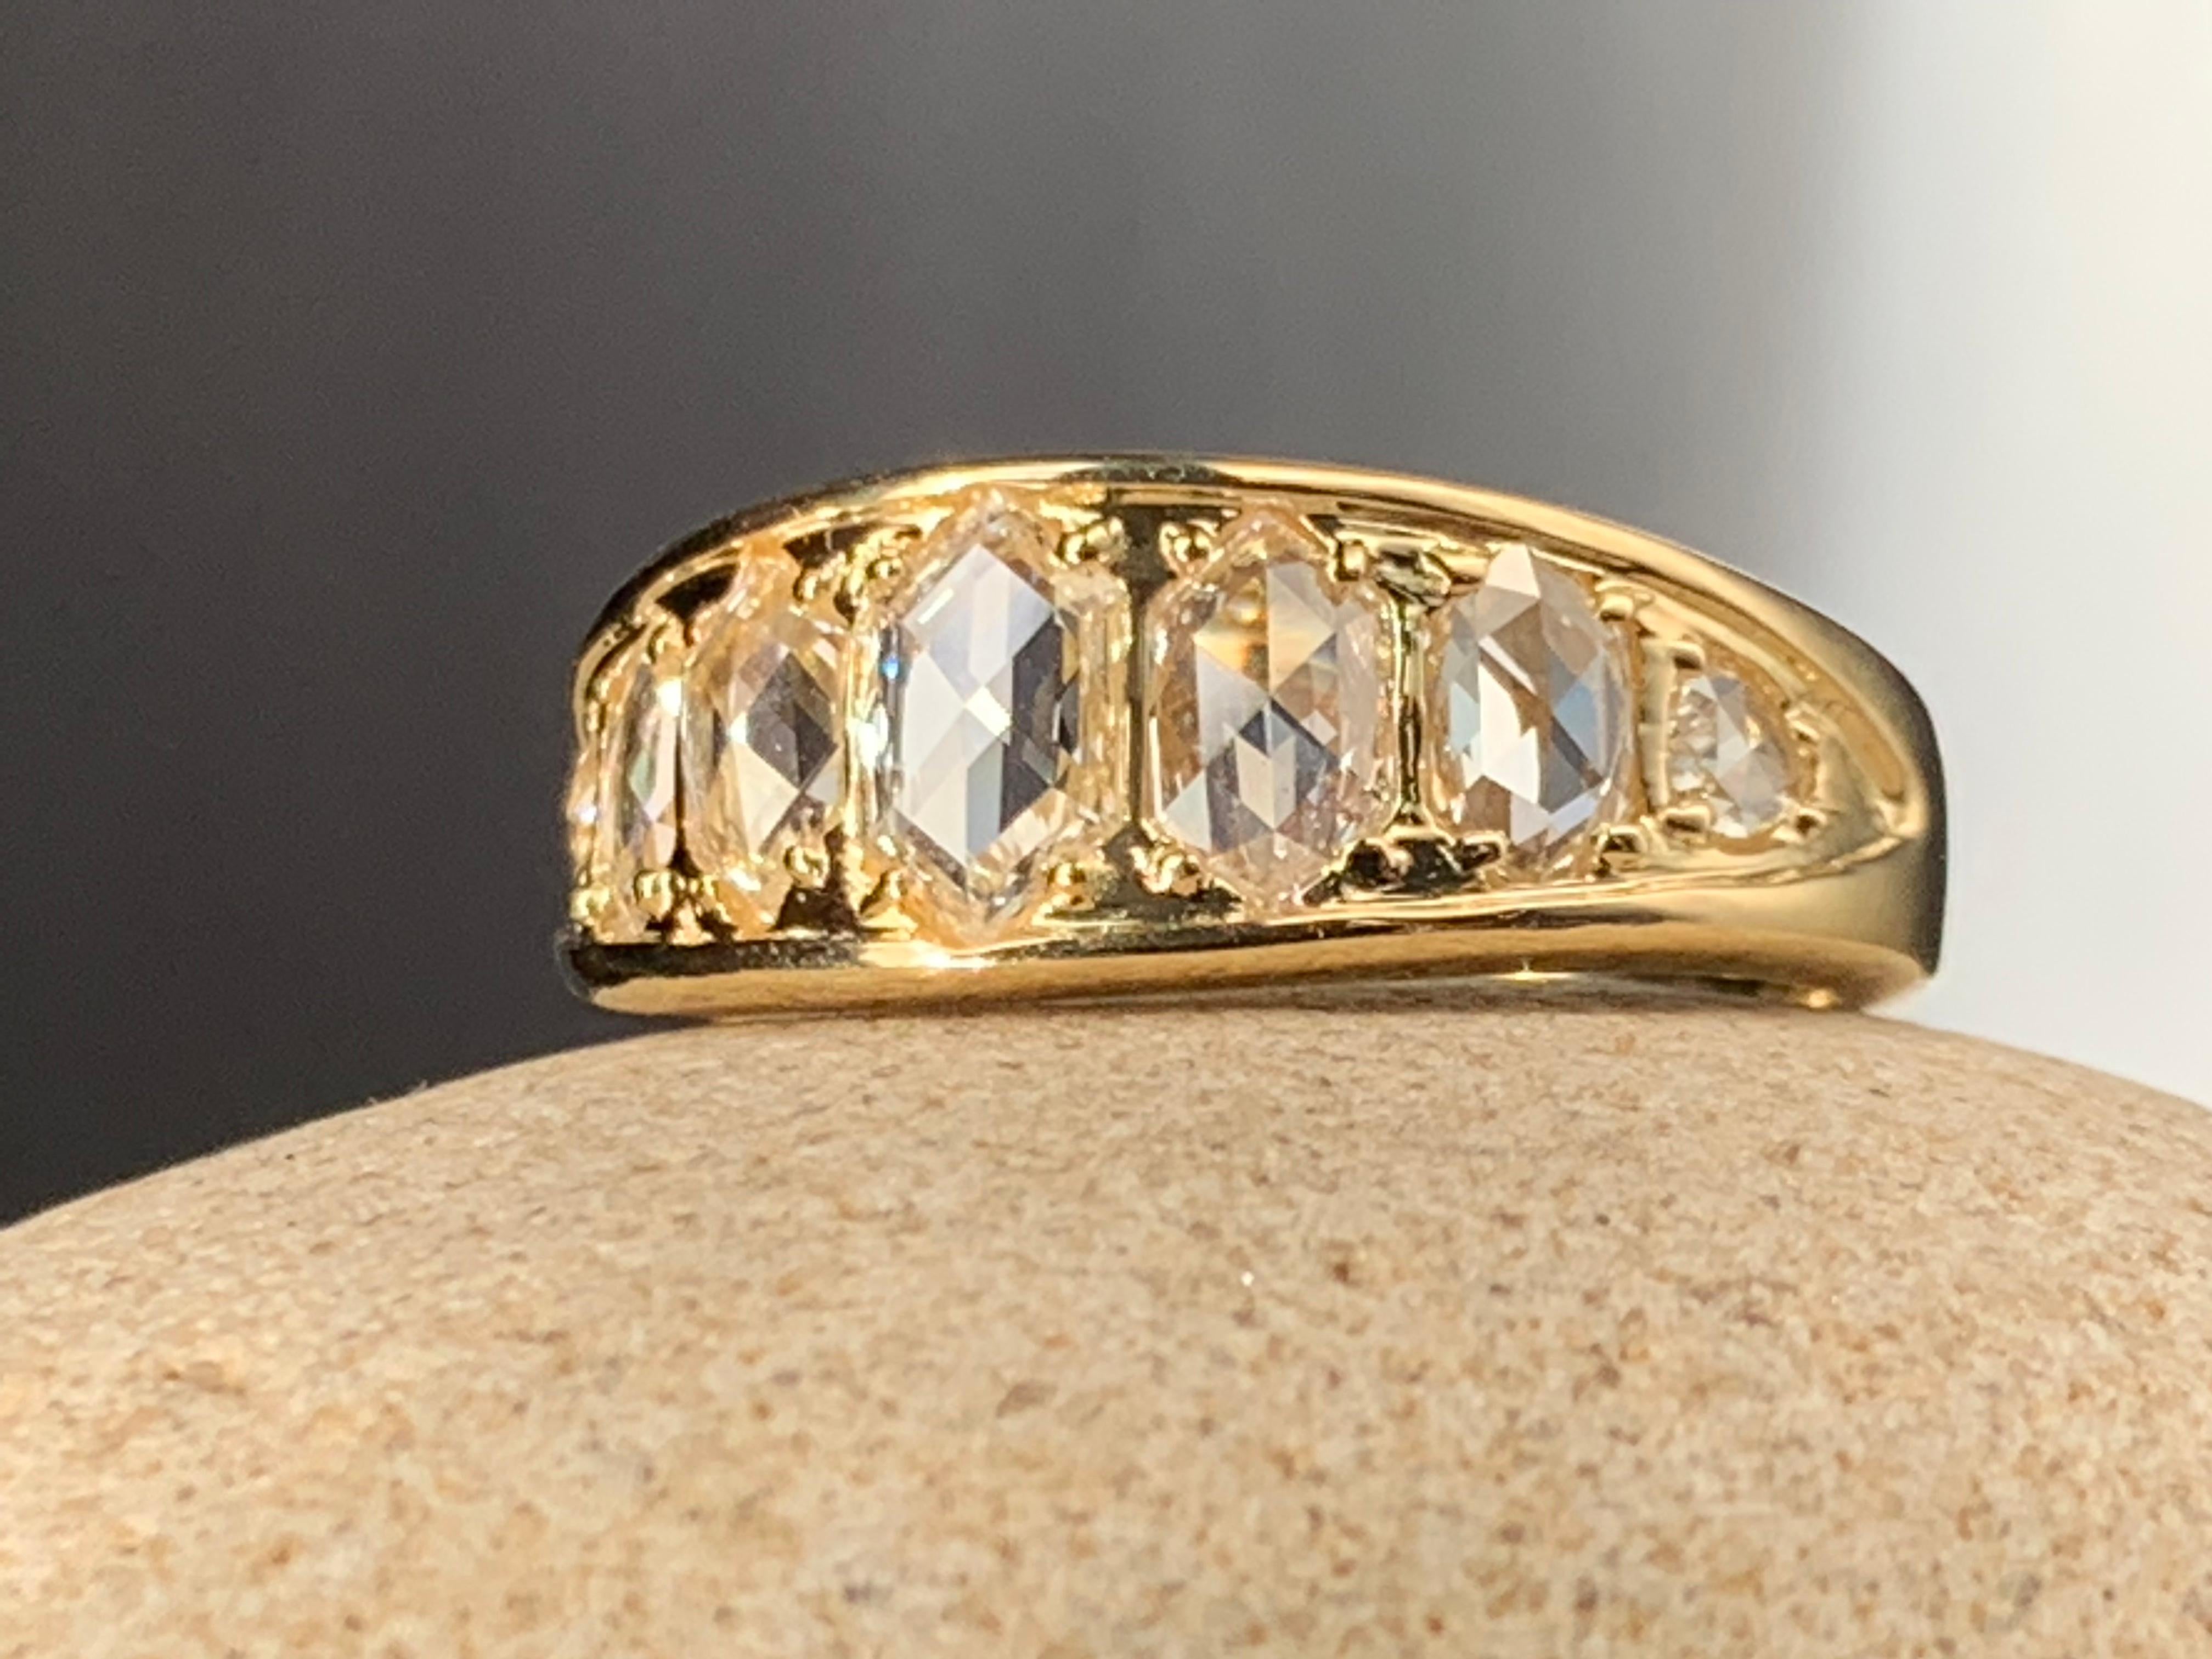 The one-of-a-kind band of graduating hexagonal shaped fine white rose cut diamonds is both graceful and bold. A dynamic play of sparkling light flows spontaneously across the band.

18kt yellow gold
White rose cut diamonds: 1.33 cts
Width: 5/16